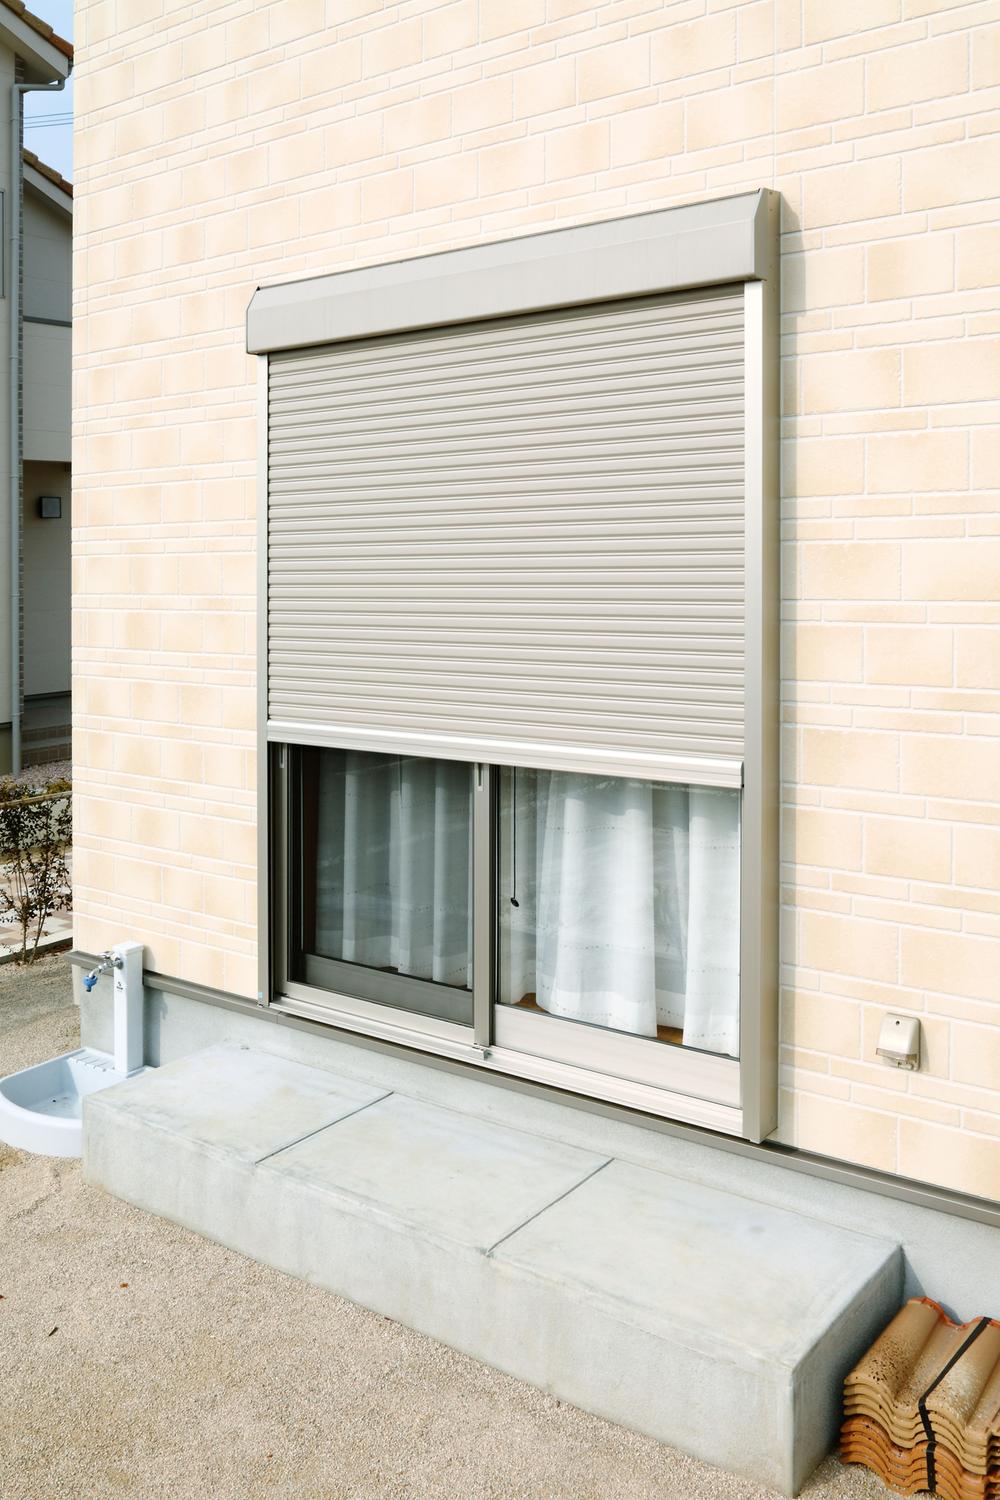 Security equipment. For crime prevention shutter is standard equipment in the windows of the first floor